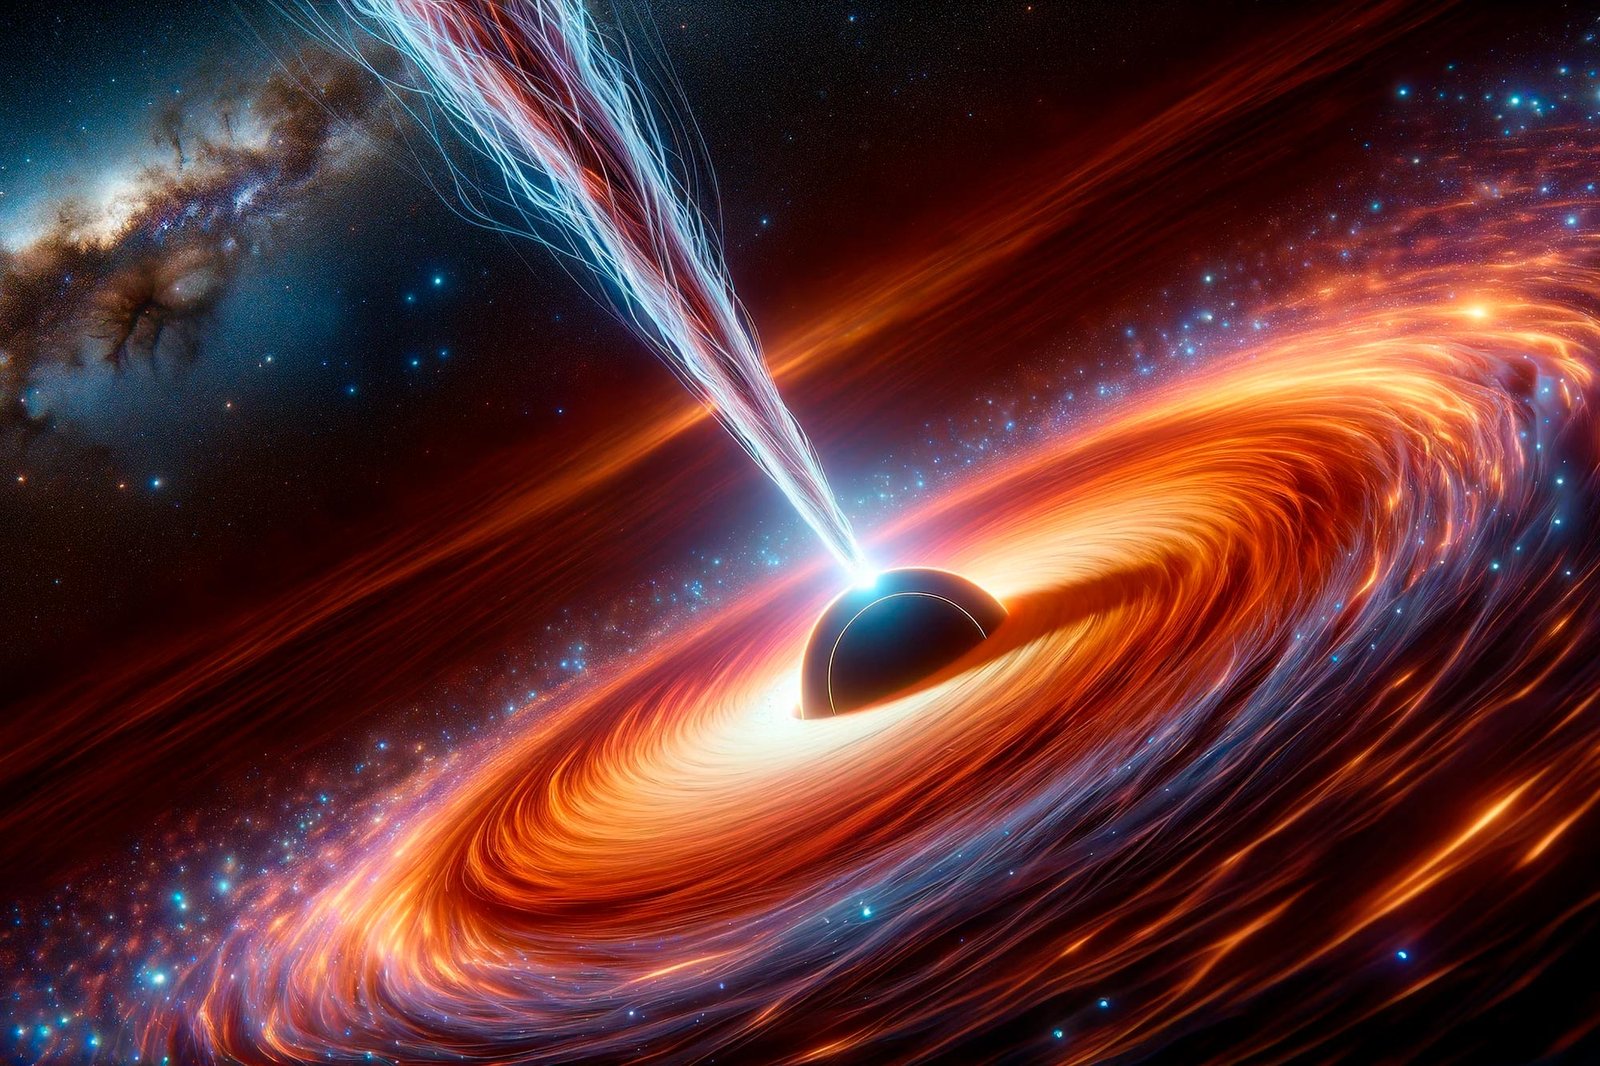 Princeton Astrophysicists Unravel the Mystery of Black Hole Jets and Galactic “Lightsabers”